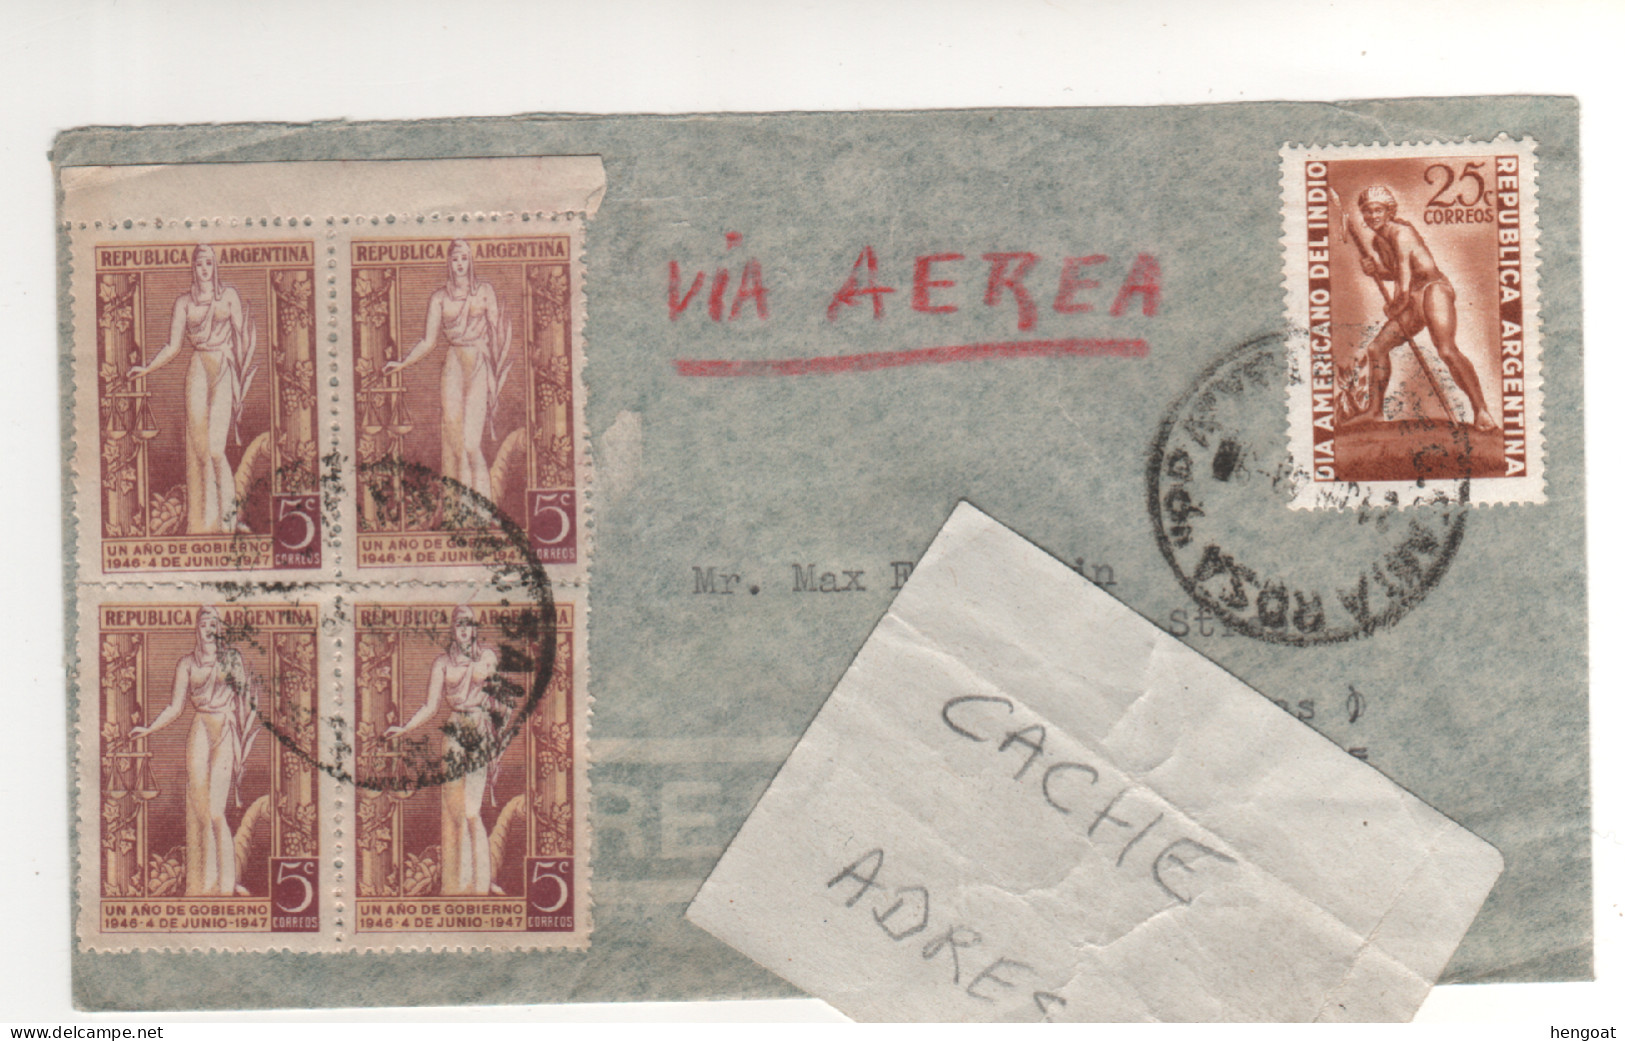 5 Timbres , Stamps  Sur Lettre , Cover , Mail Du 24/06/48 - Covers & Documents